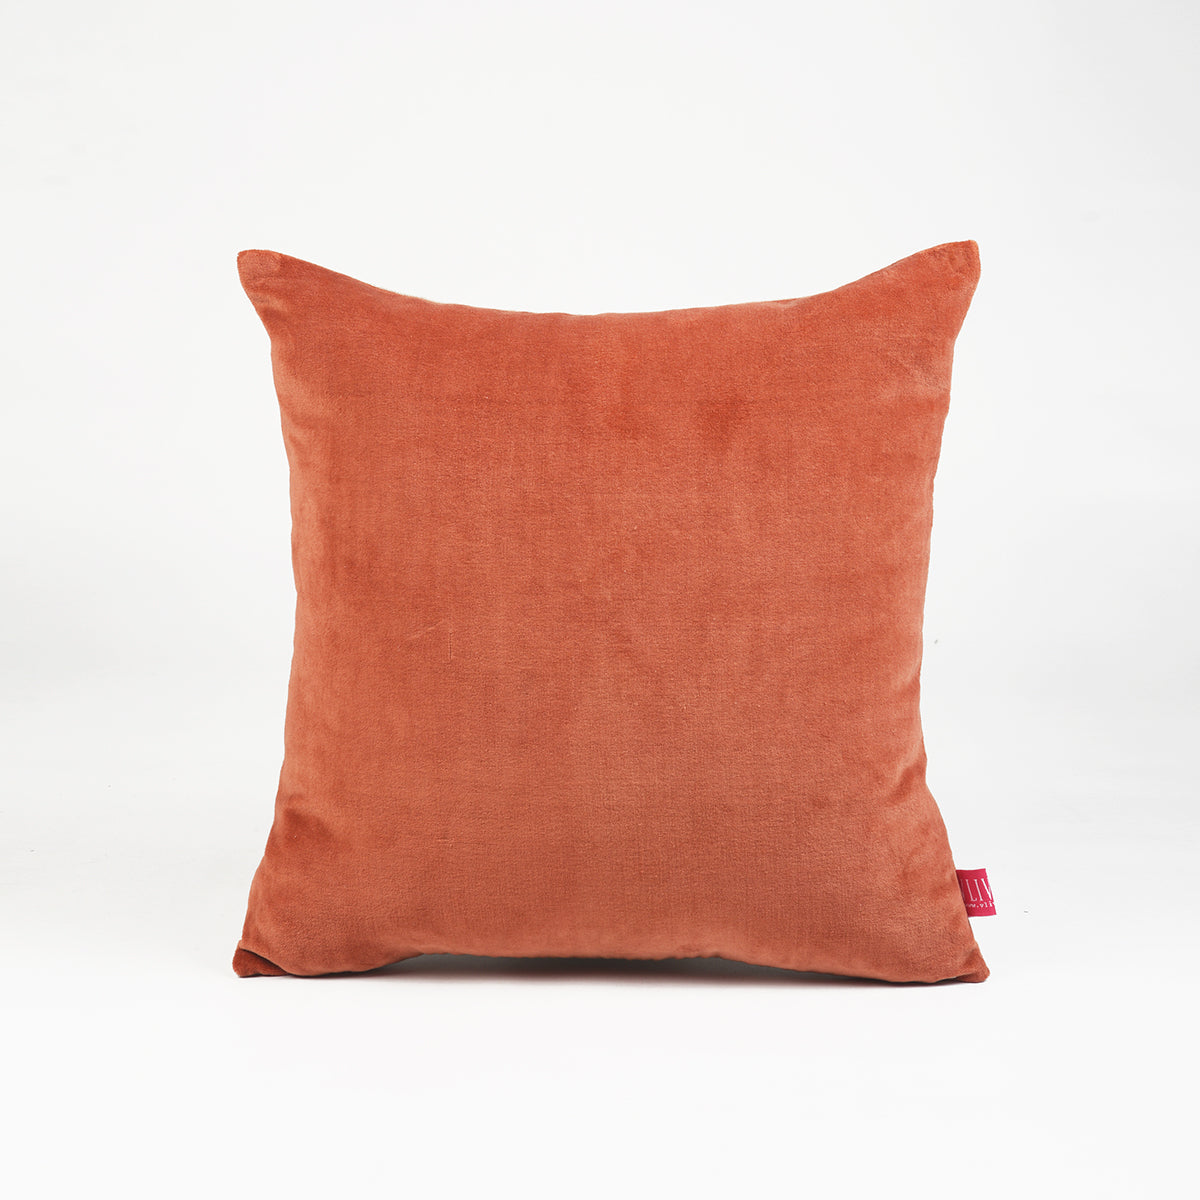 Rust velvet & linen reversible pillow cover, autumn and fall colour, sizes available